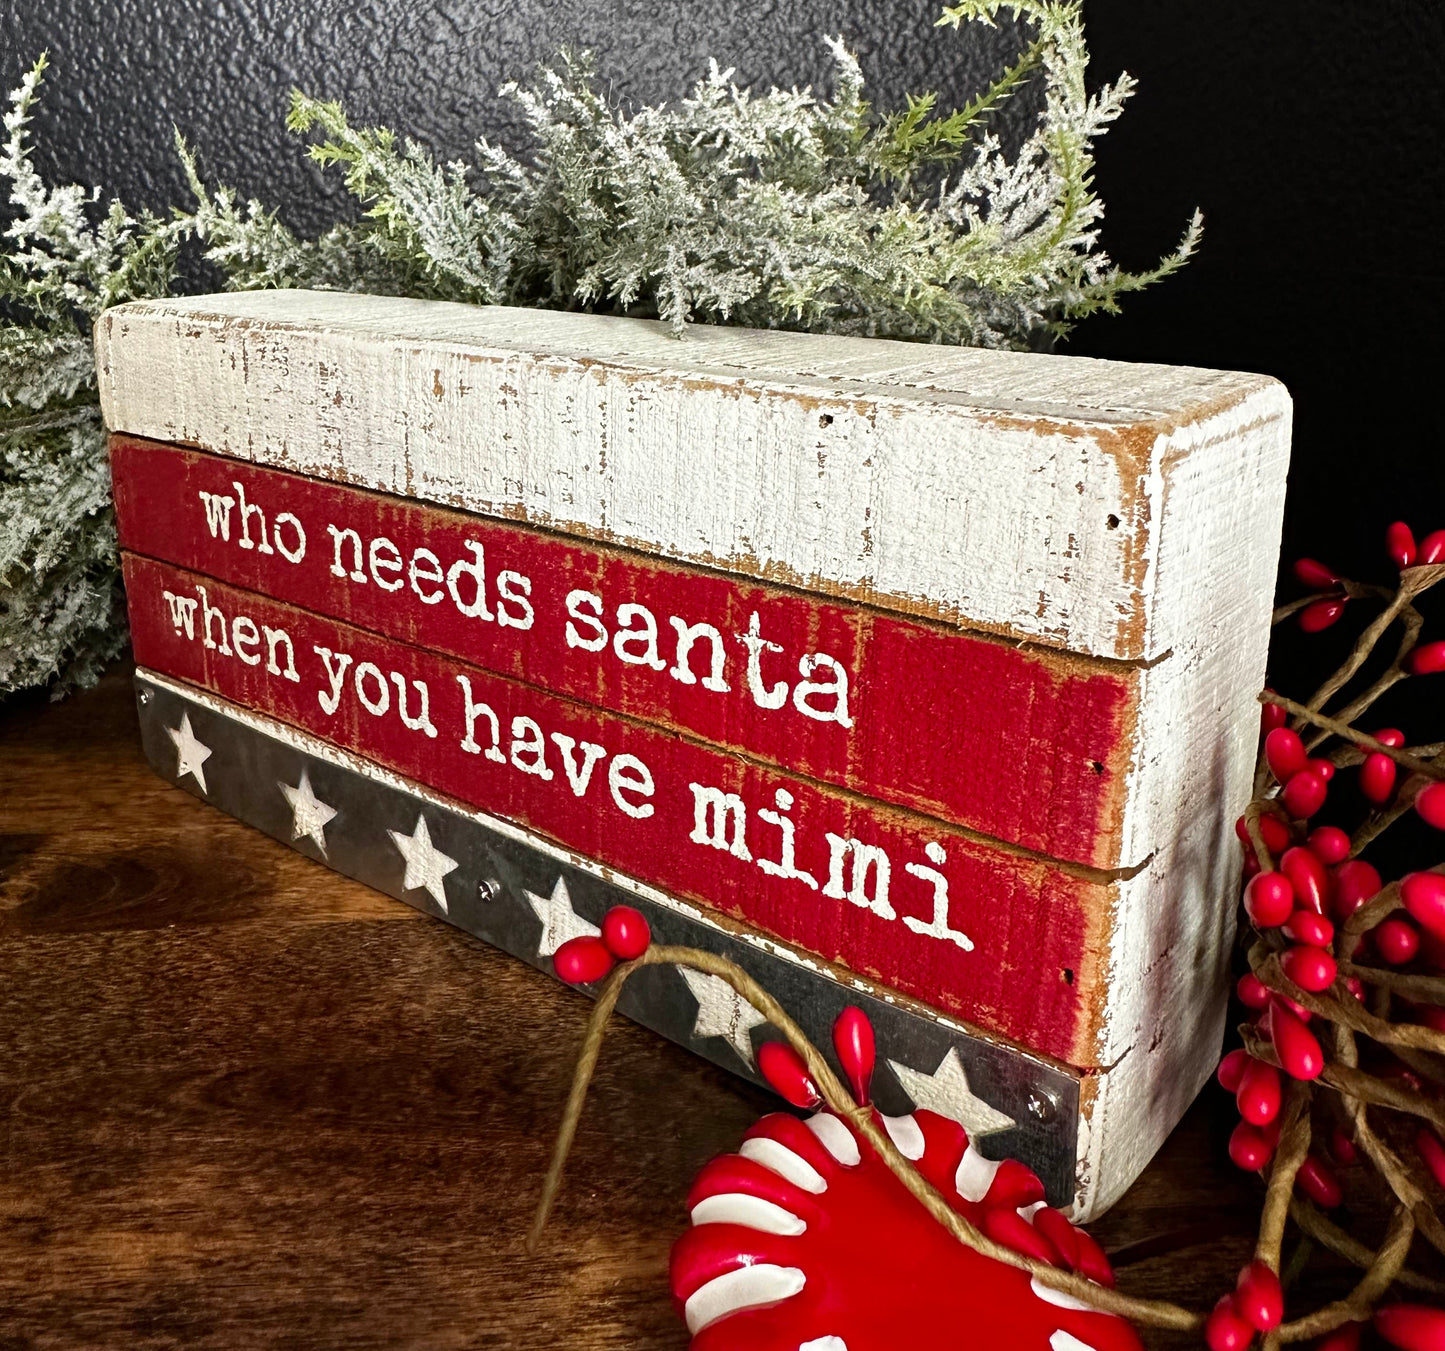 Rustic Who Needs Santa When You Have Mimi shelf sitter